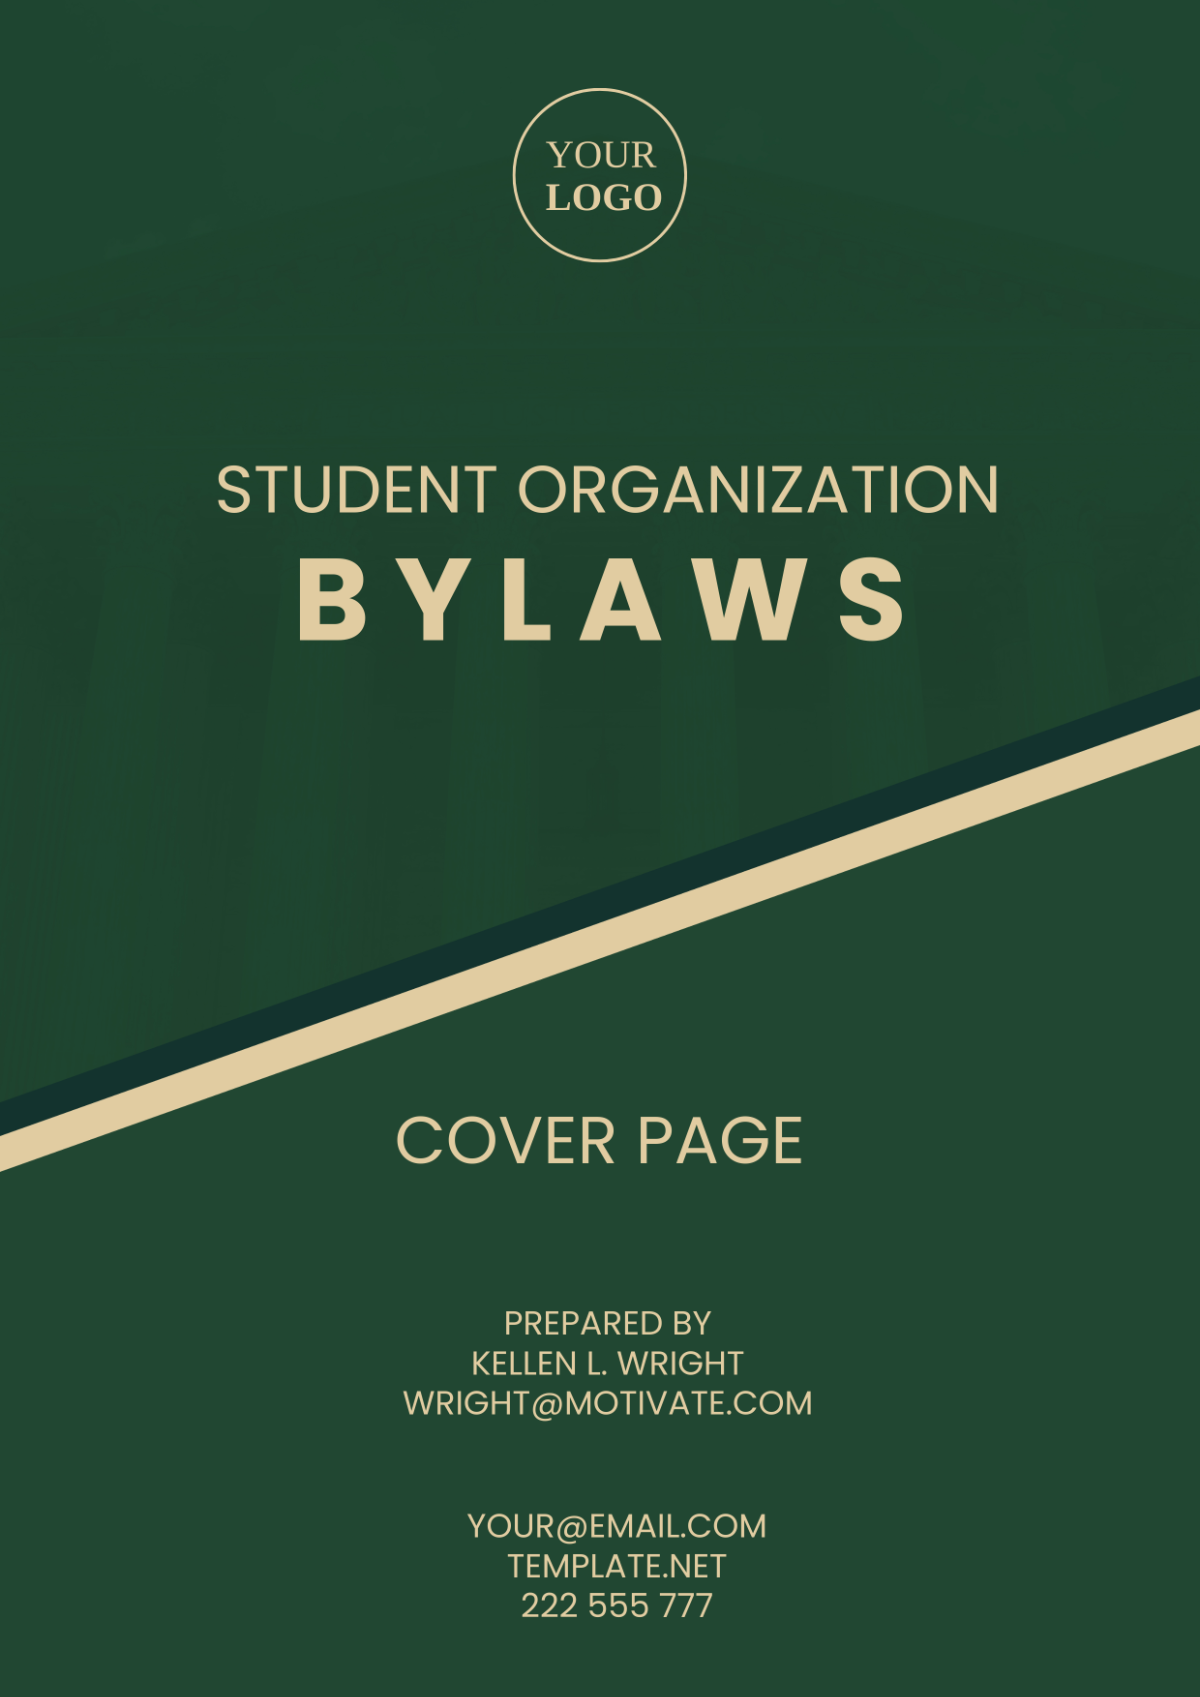 Student Organization Bylaws Cover Page